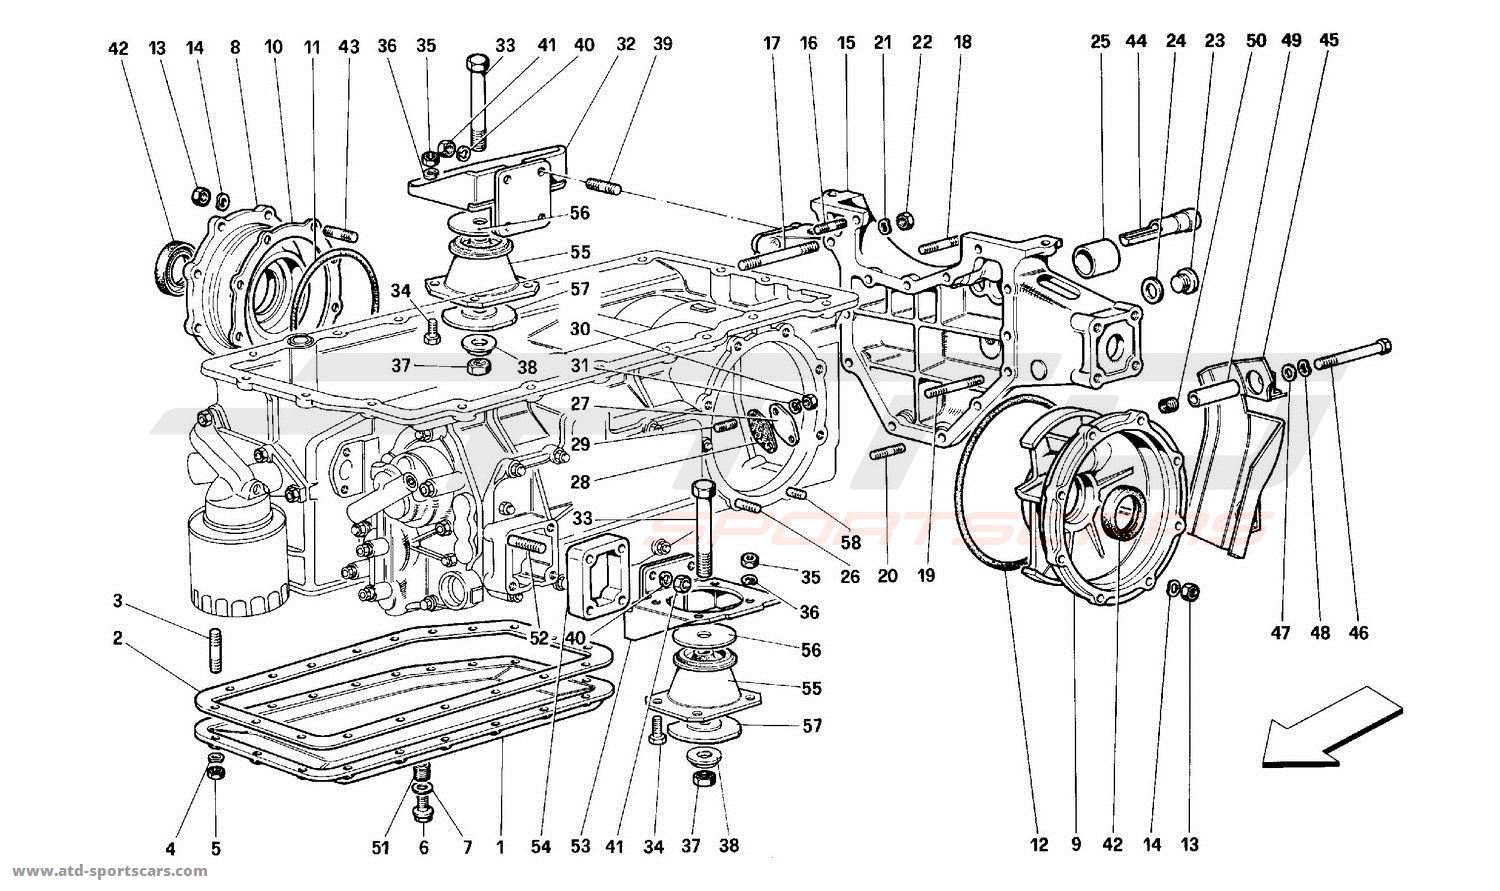 Ferrari 512M GEARBOX - MOUNTING AND COVERS